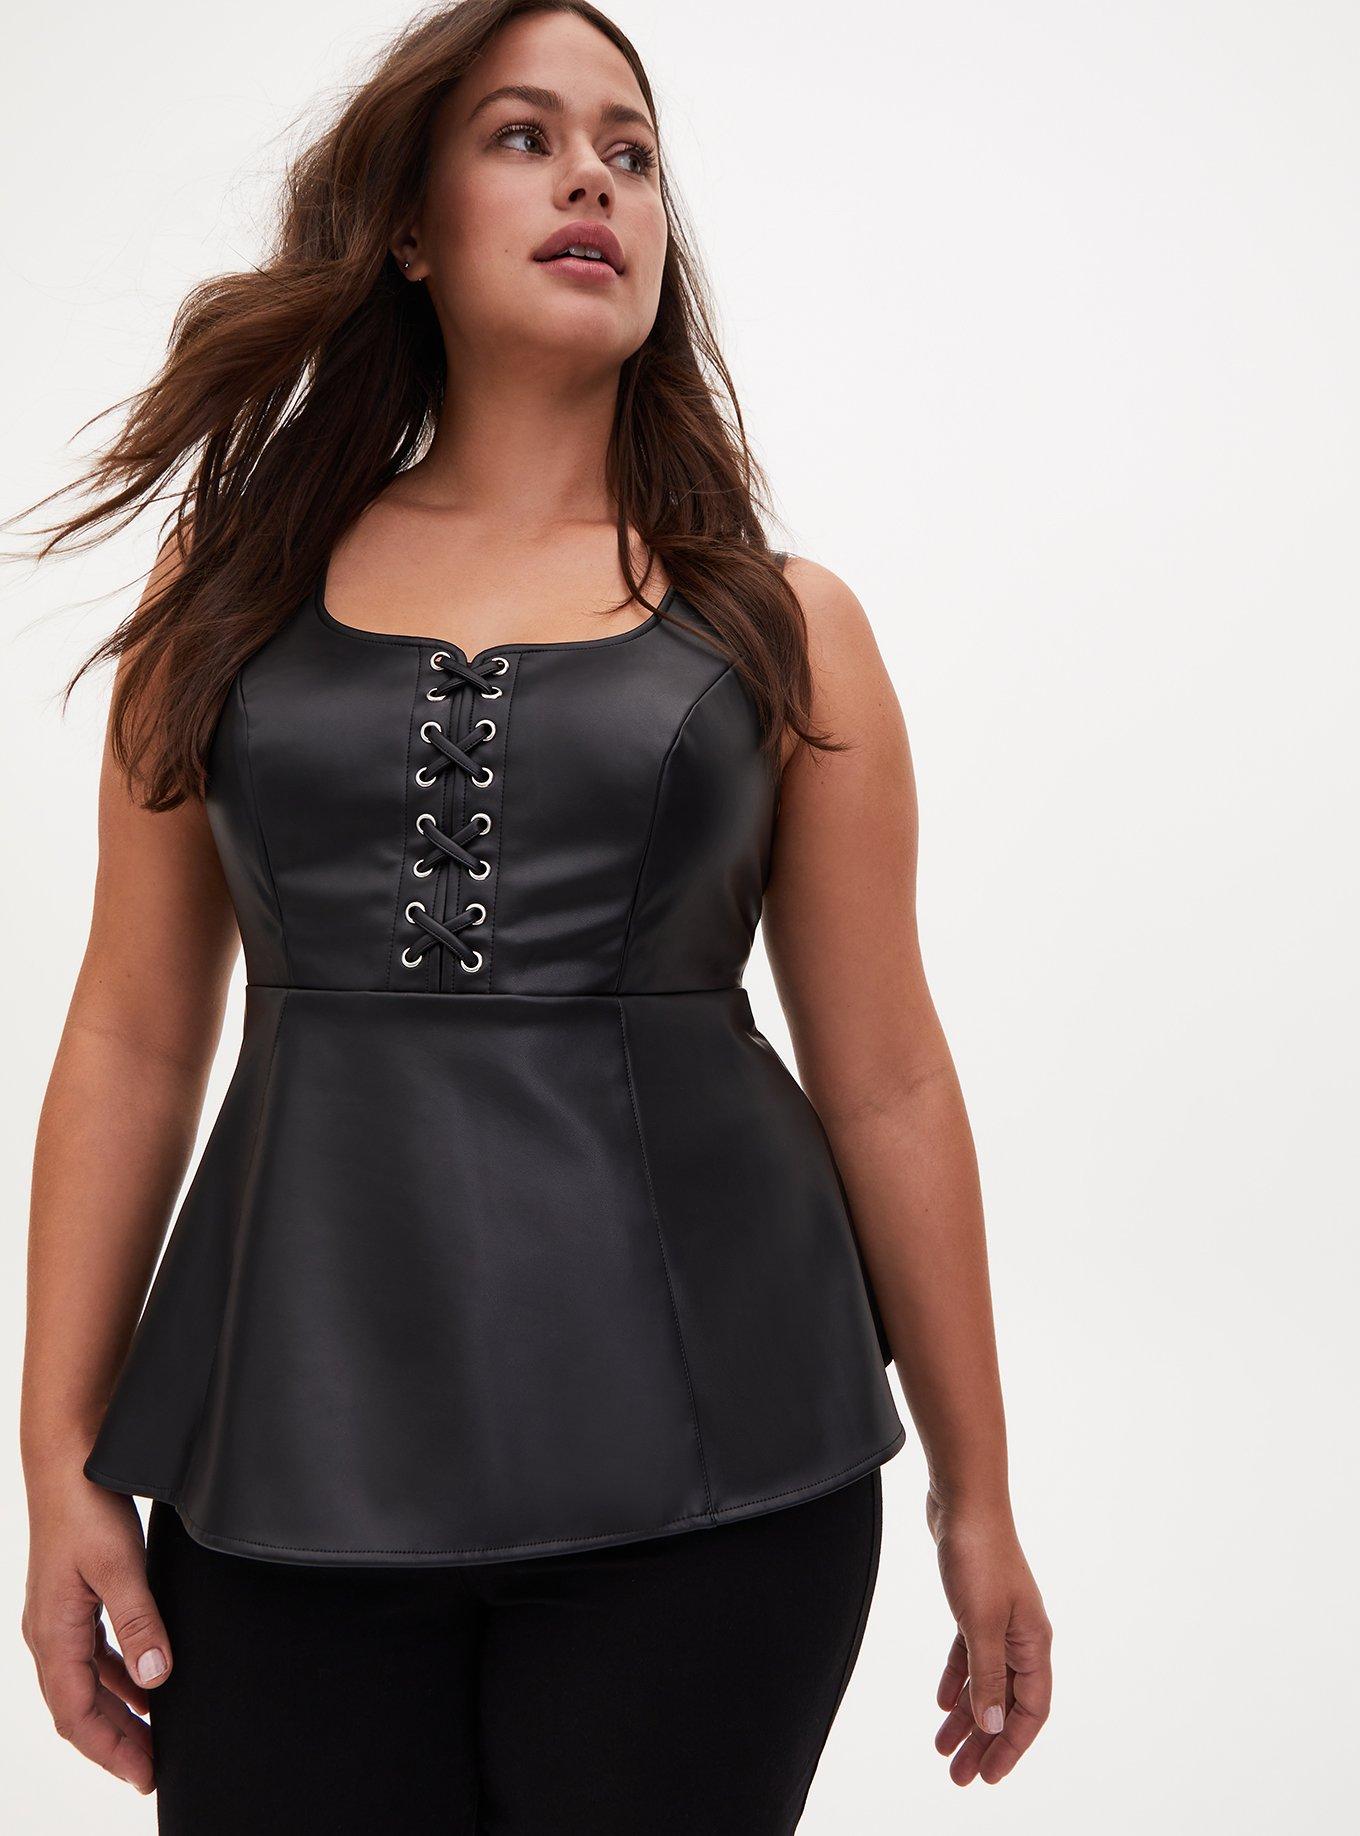 20 Plus Size Peplum Tops to Try This Spring - Fro Plus Fashion